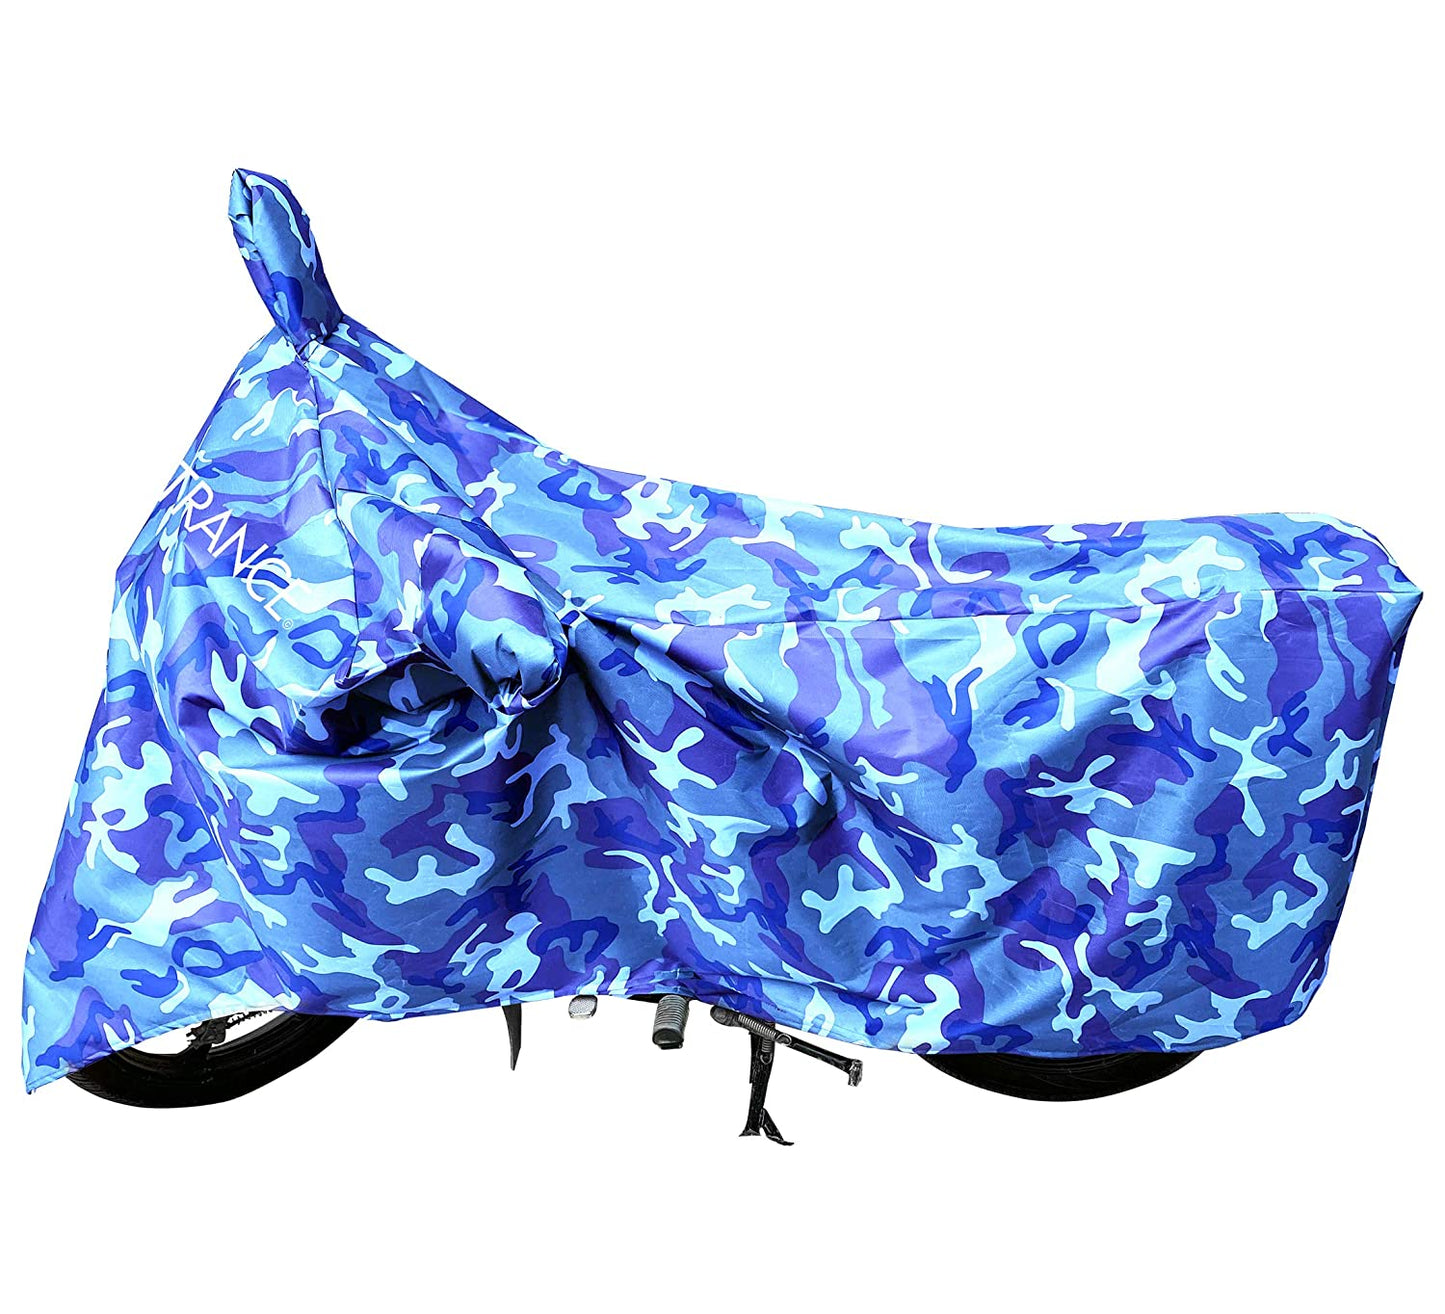 MotoTrance Jungle Bike Body Covers For Royal Enfield Classic 350 Signals 2018 - Interlock-Stitched Waterproof and Heat Resistant with Mirror Pockets